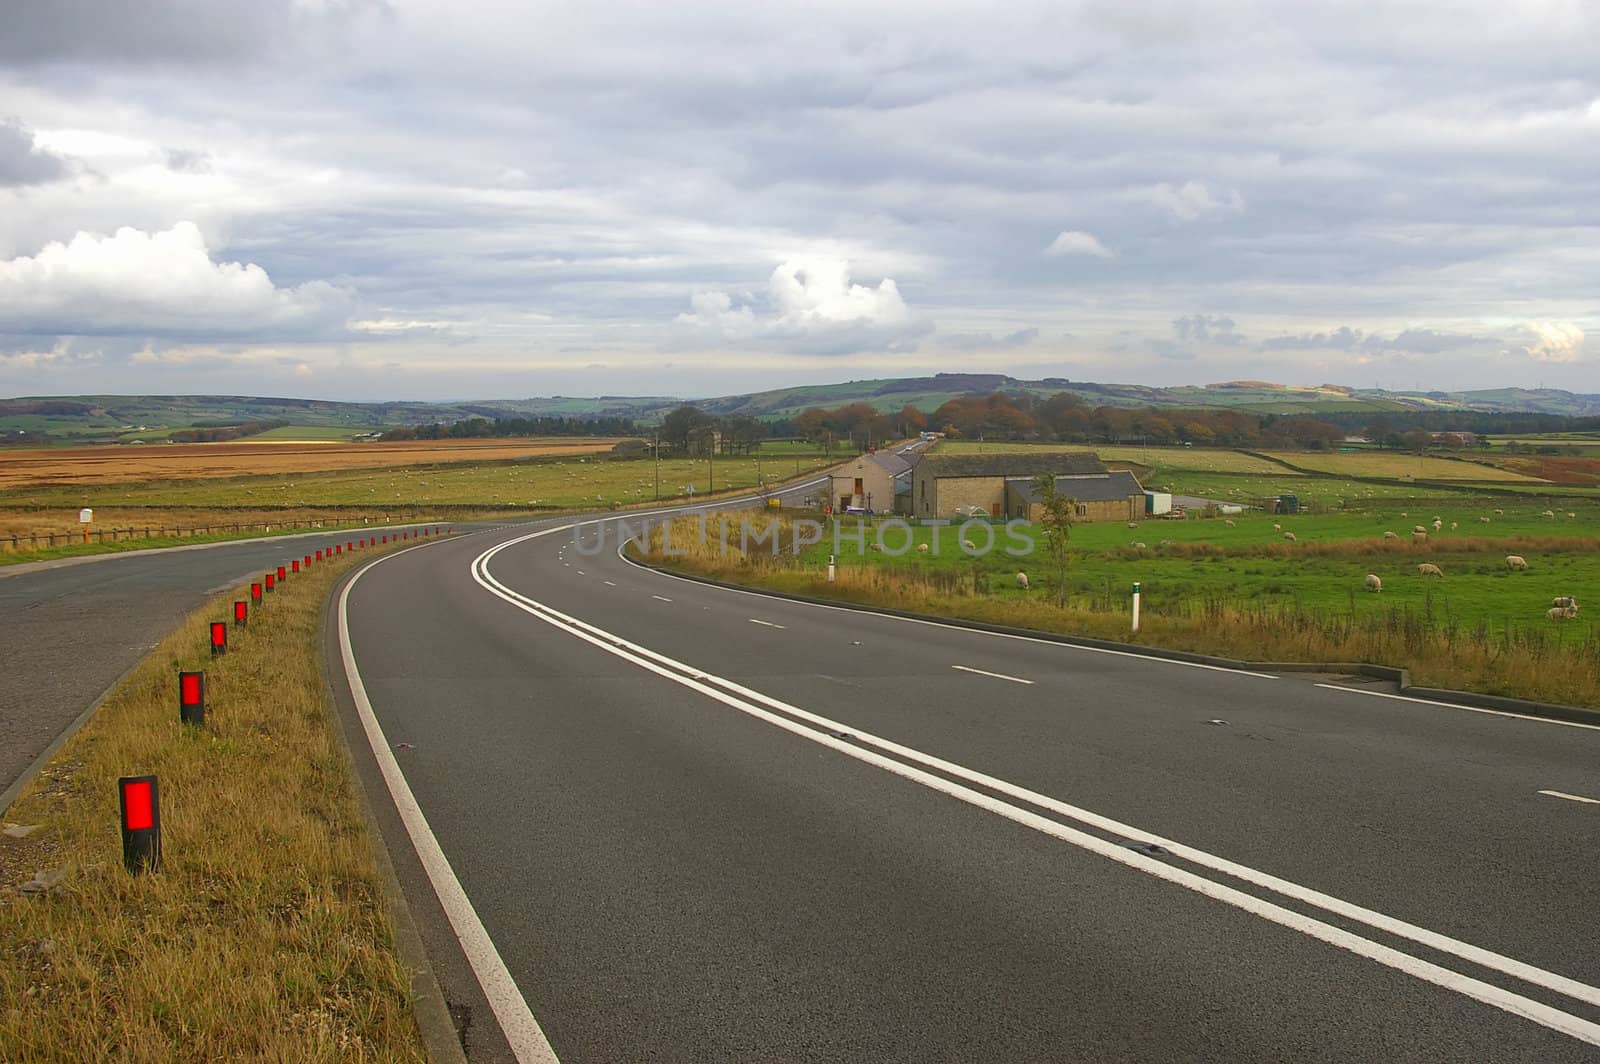 A road connecting Greater Manchester and South Yorkshire, which runs through the Peak district national park. Woodhead Pass, Yorkshire, England.